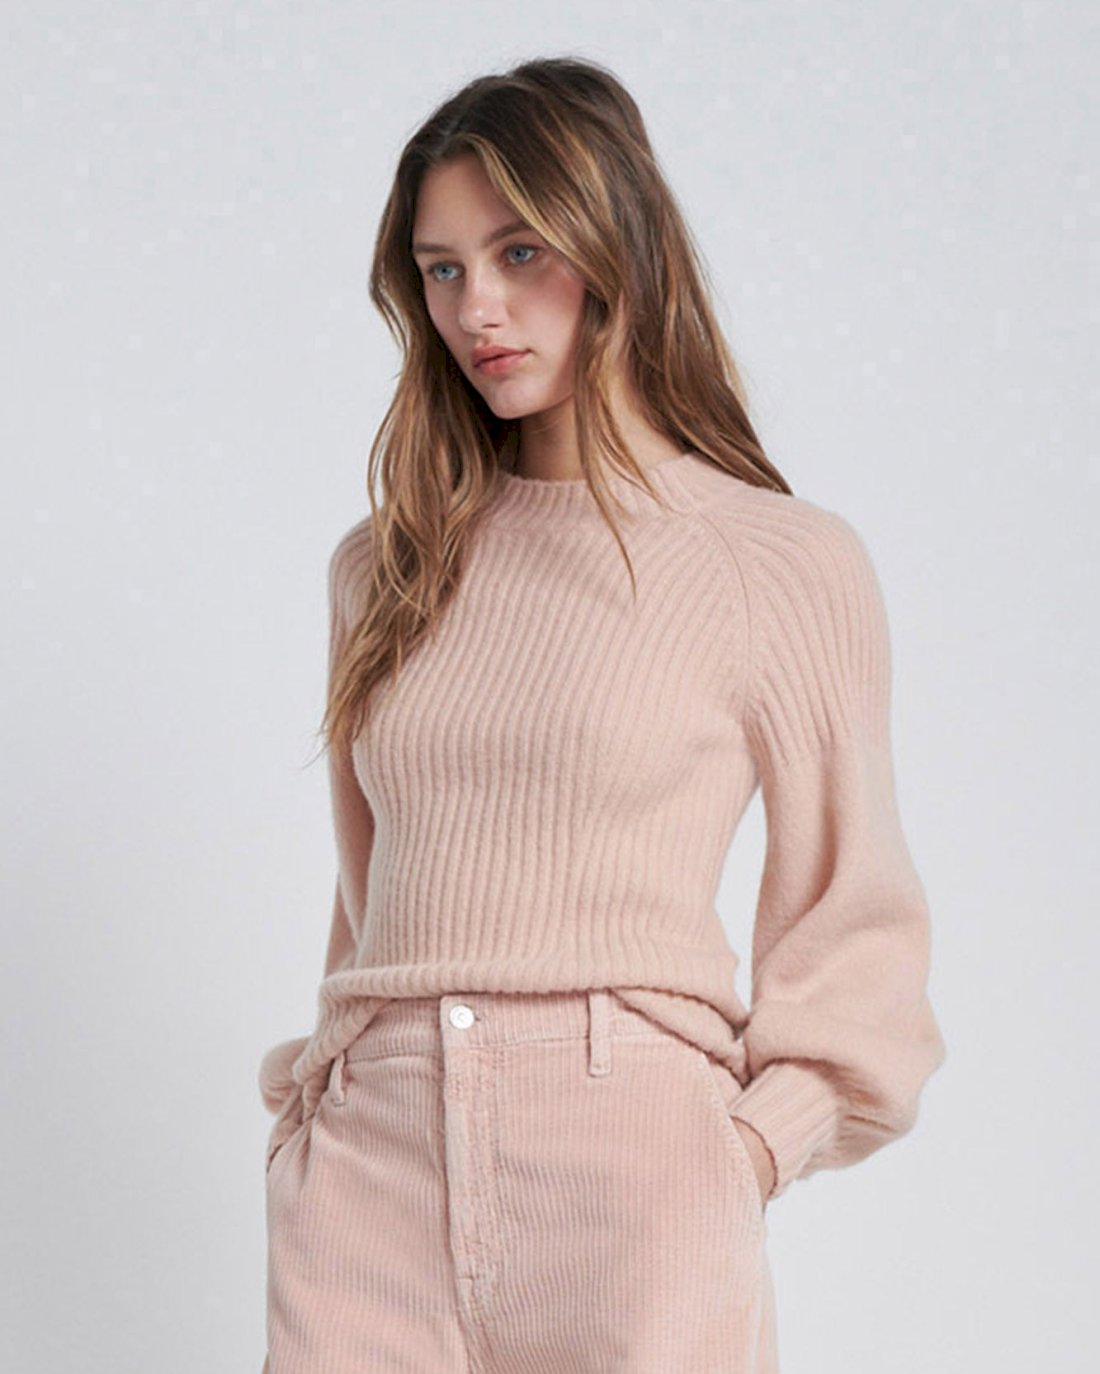 7 For All Mankind Lantern Sleeve Sweater in Blush 7N070D44BLS